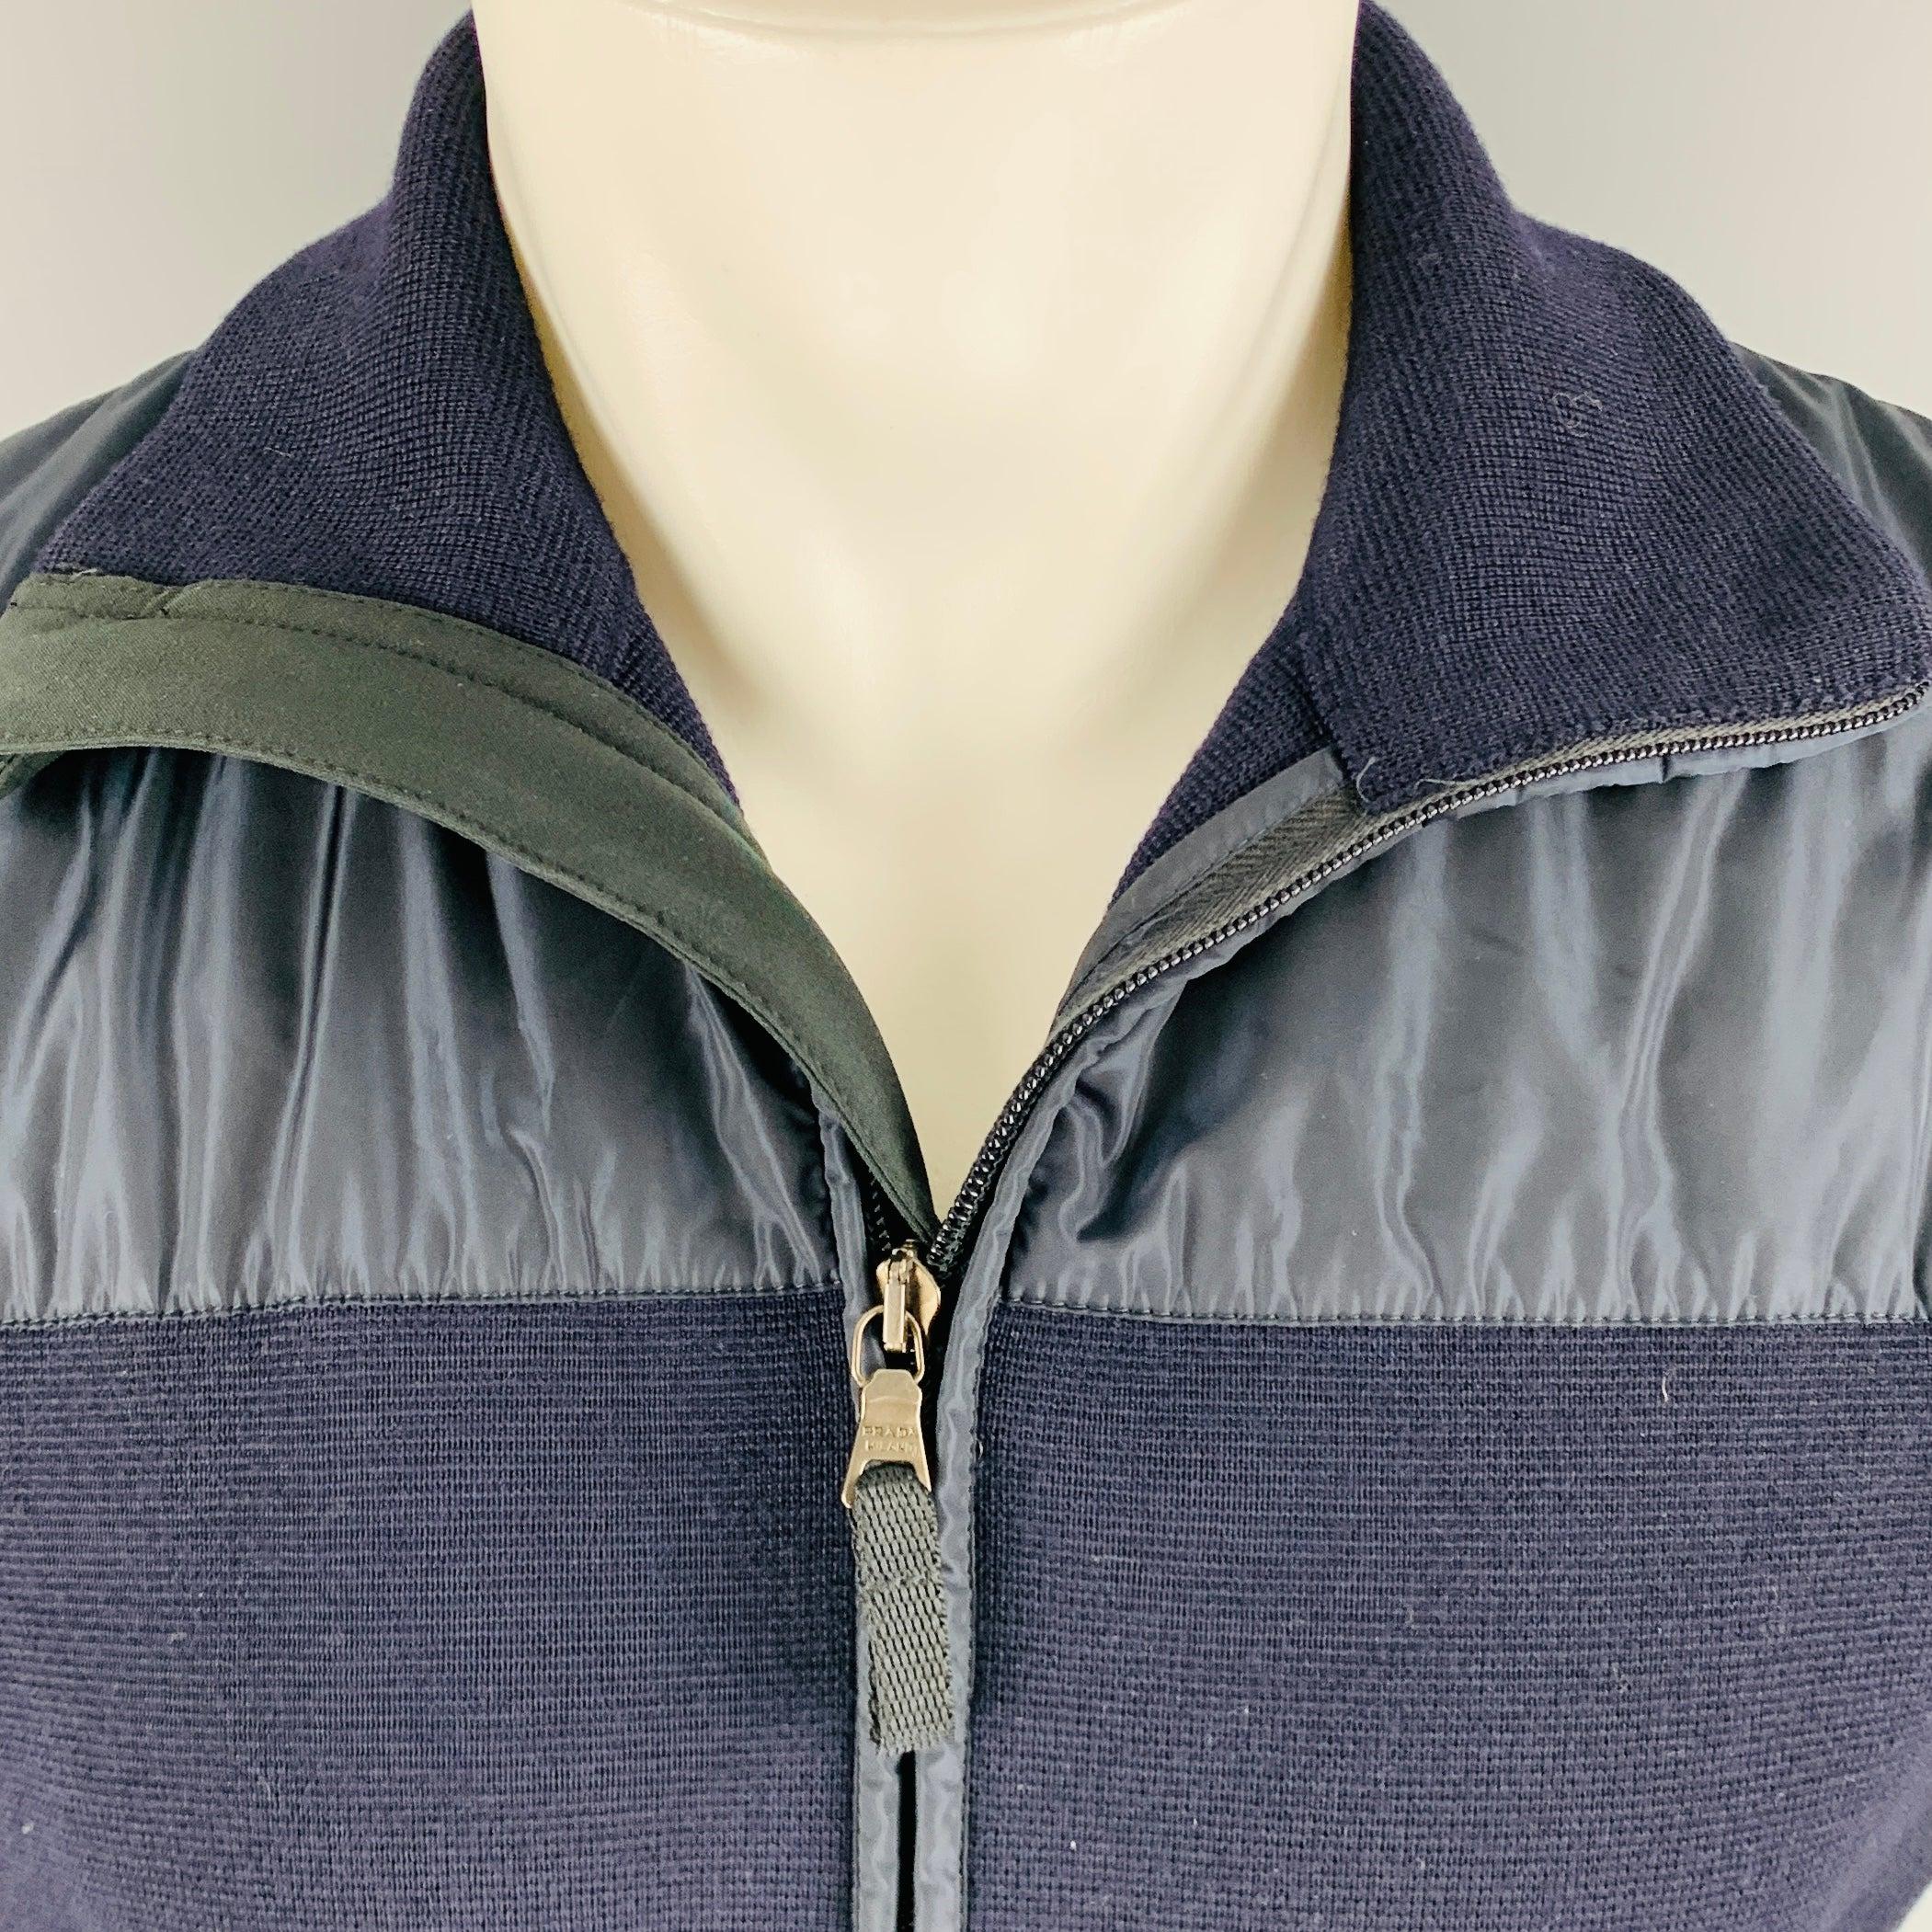 PRADA jacket
in a navy wool fabric with nylon trim, featuring a waffle knit style, blouson sleeves, and zip up closure. Made in Romania.Very Good Pre-Owned Condition. Minor mark on left sleeve, and small tear on back. 

Marked:   50 

Measurements: